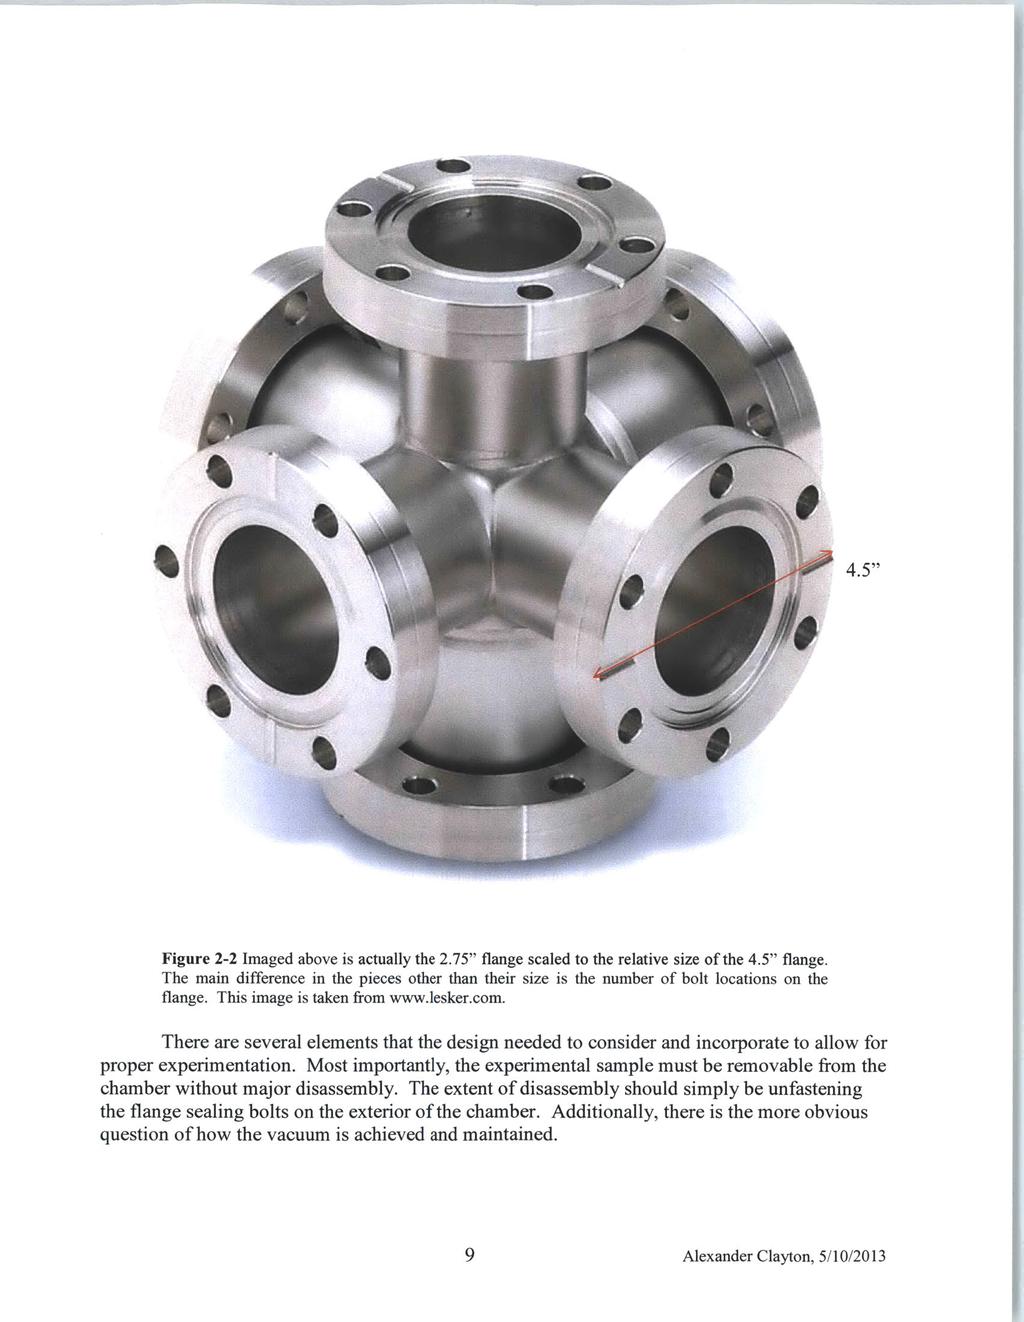 Figure 2-2 Imaged above is actually the 2.75" flange scaled to the relative size of the 4.5" flange. The main difference in the pieces other than their size is the number of bolt locations on the flange.